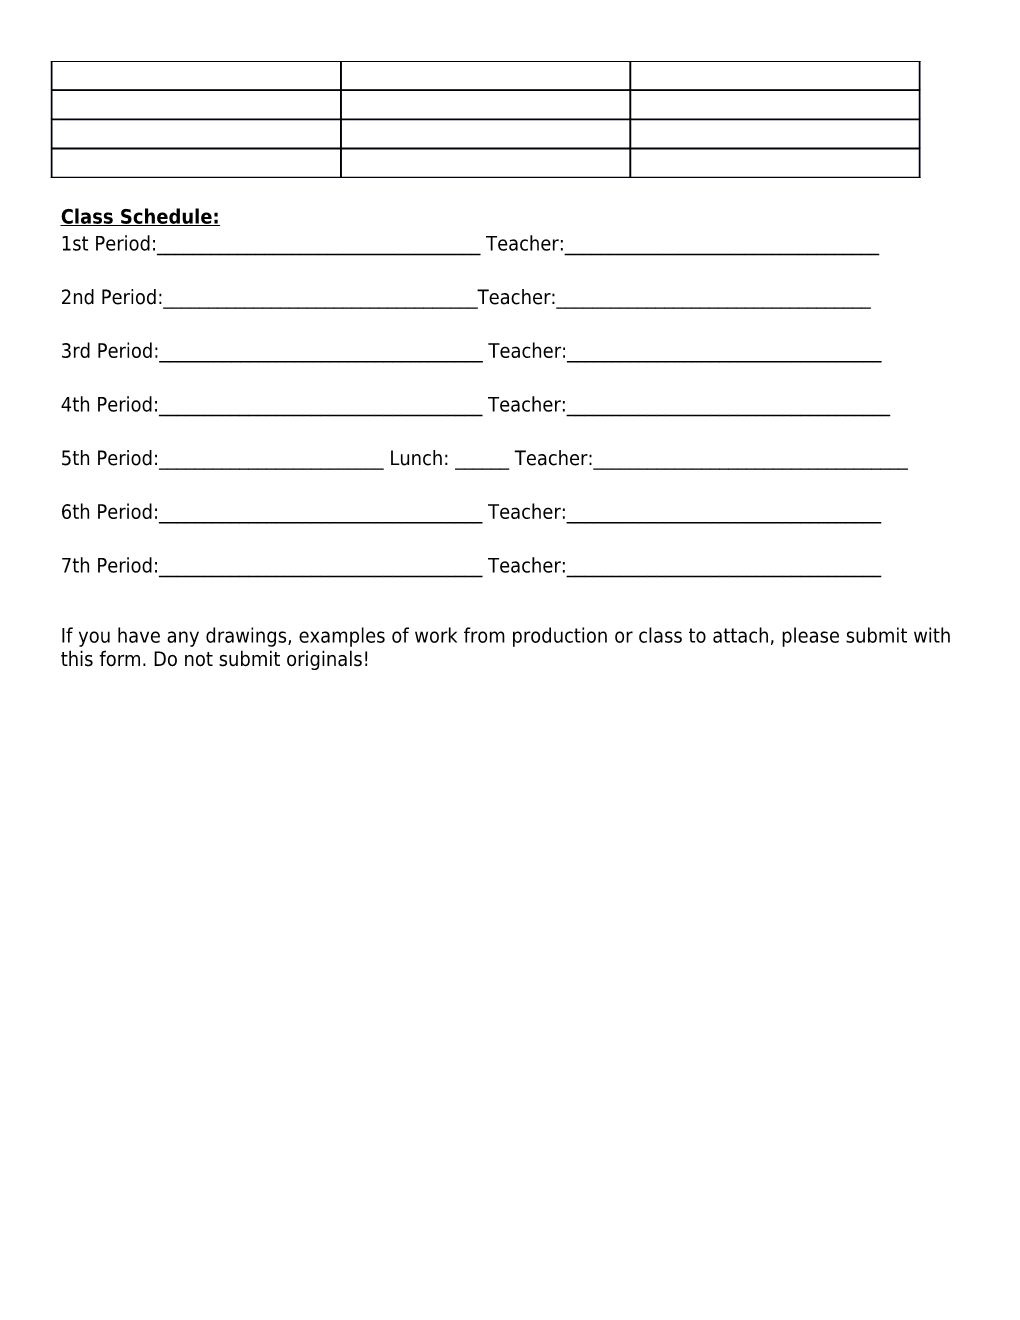 Tech Positions Application Form